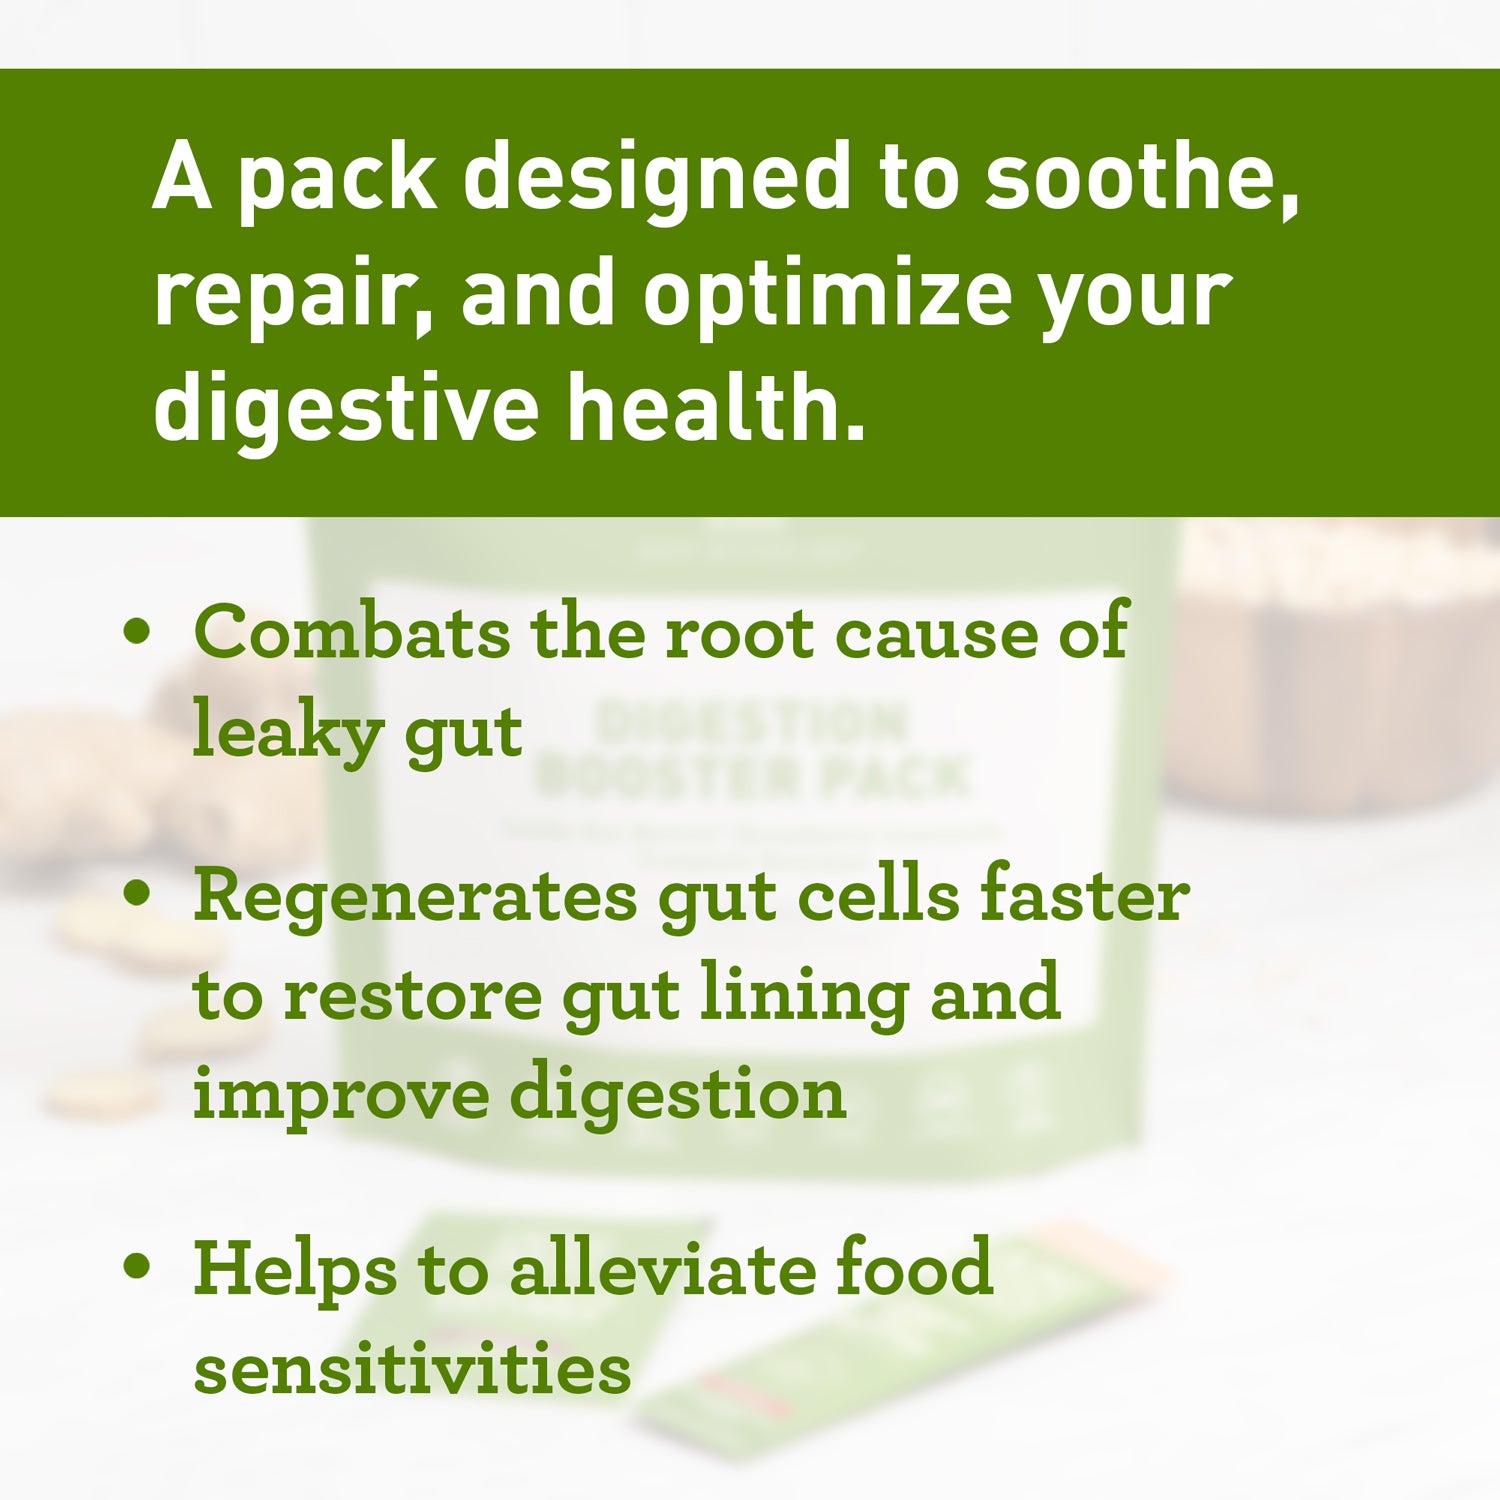 A pack designed to sooth, repair and optimize your digestive health